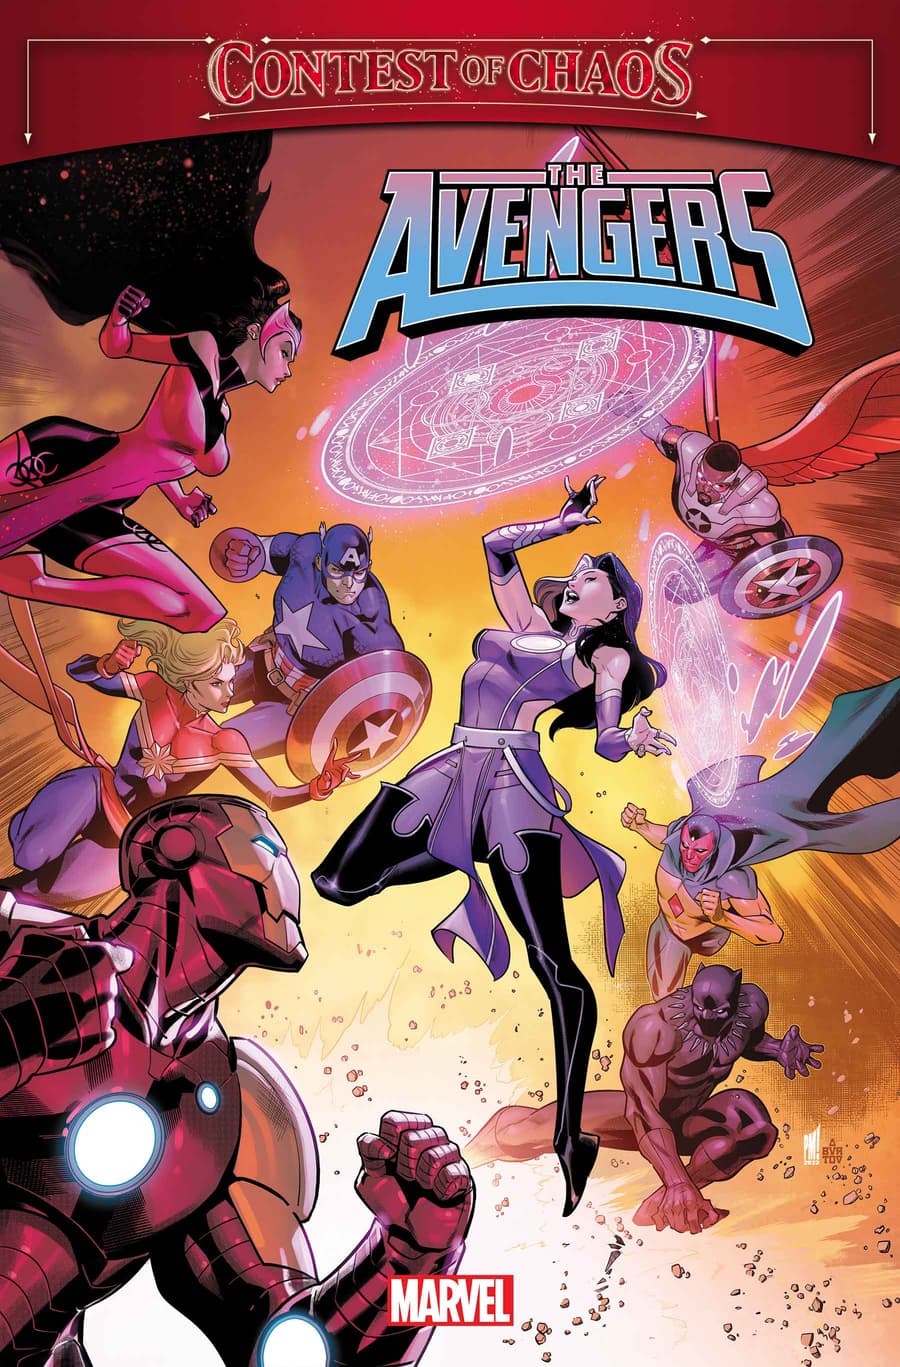 AVENGERS ANNUAL #1 cover by Paco Medina